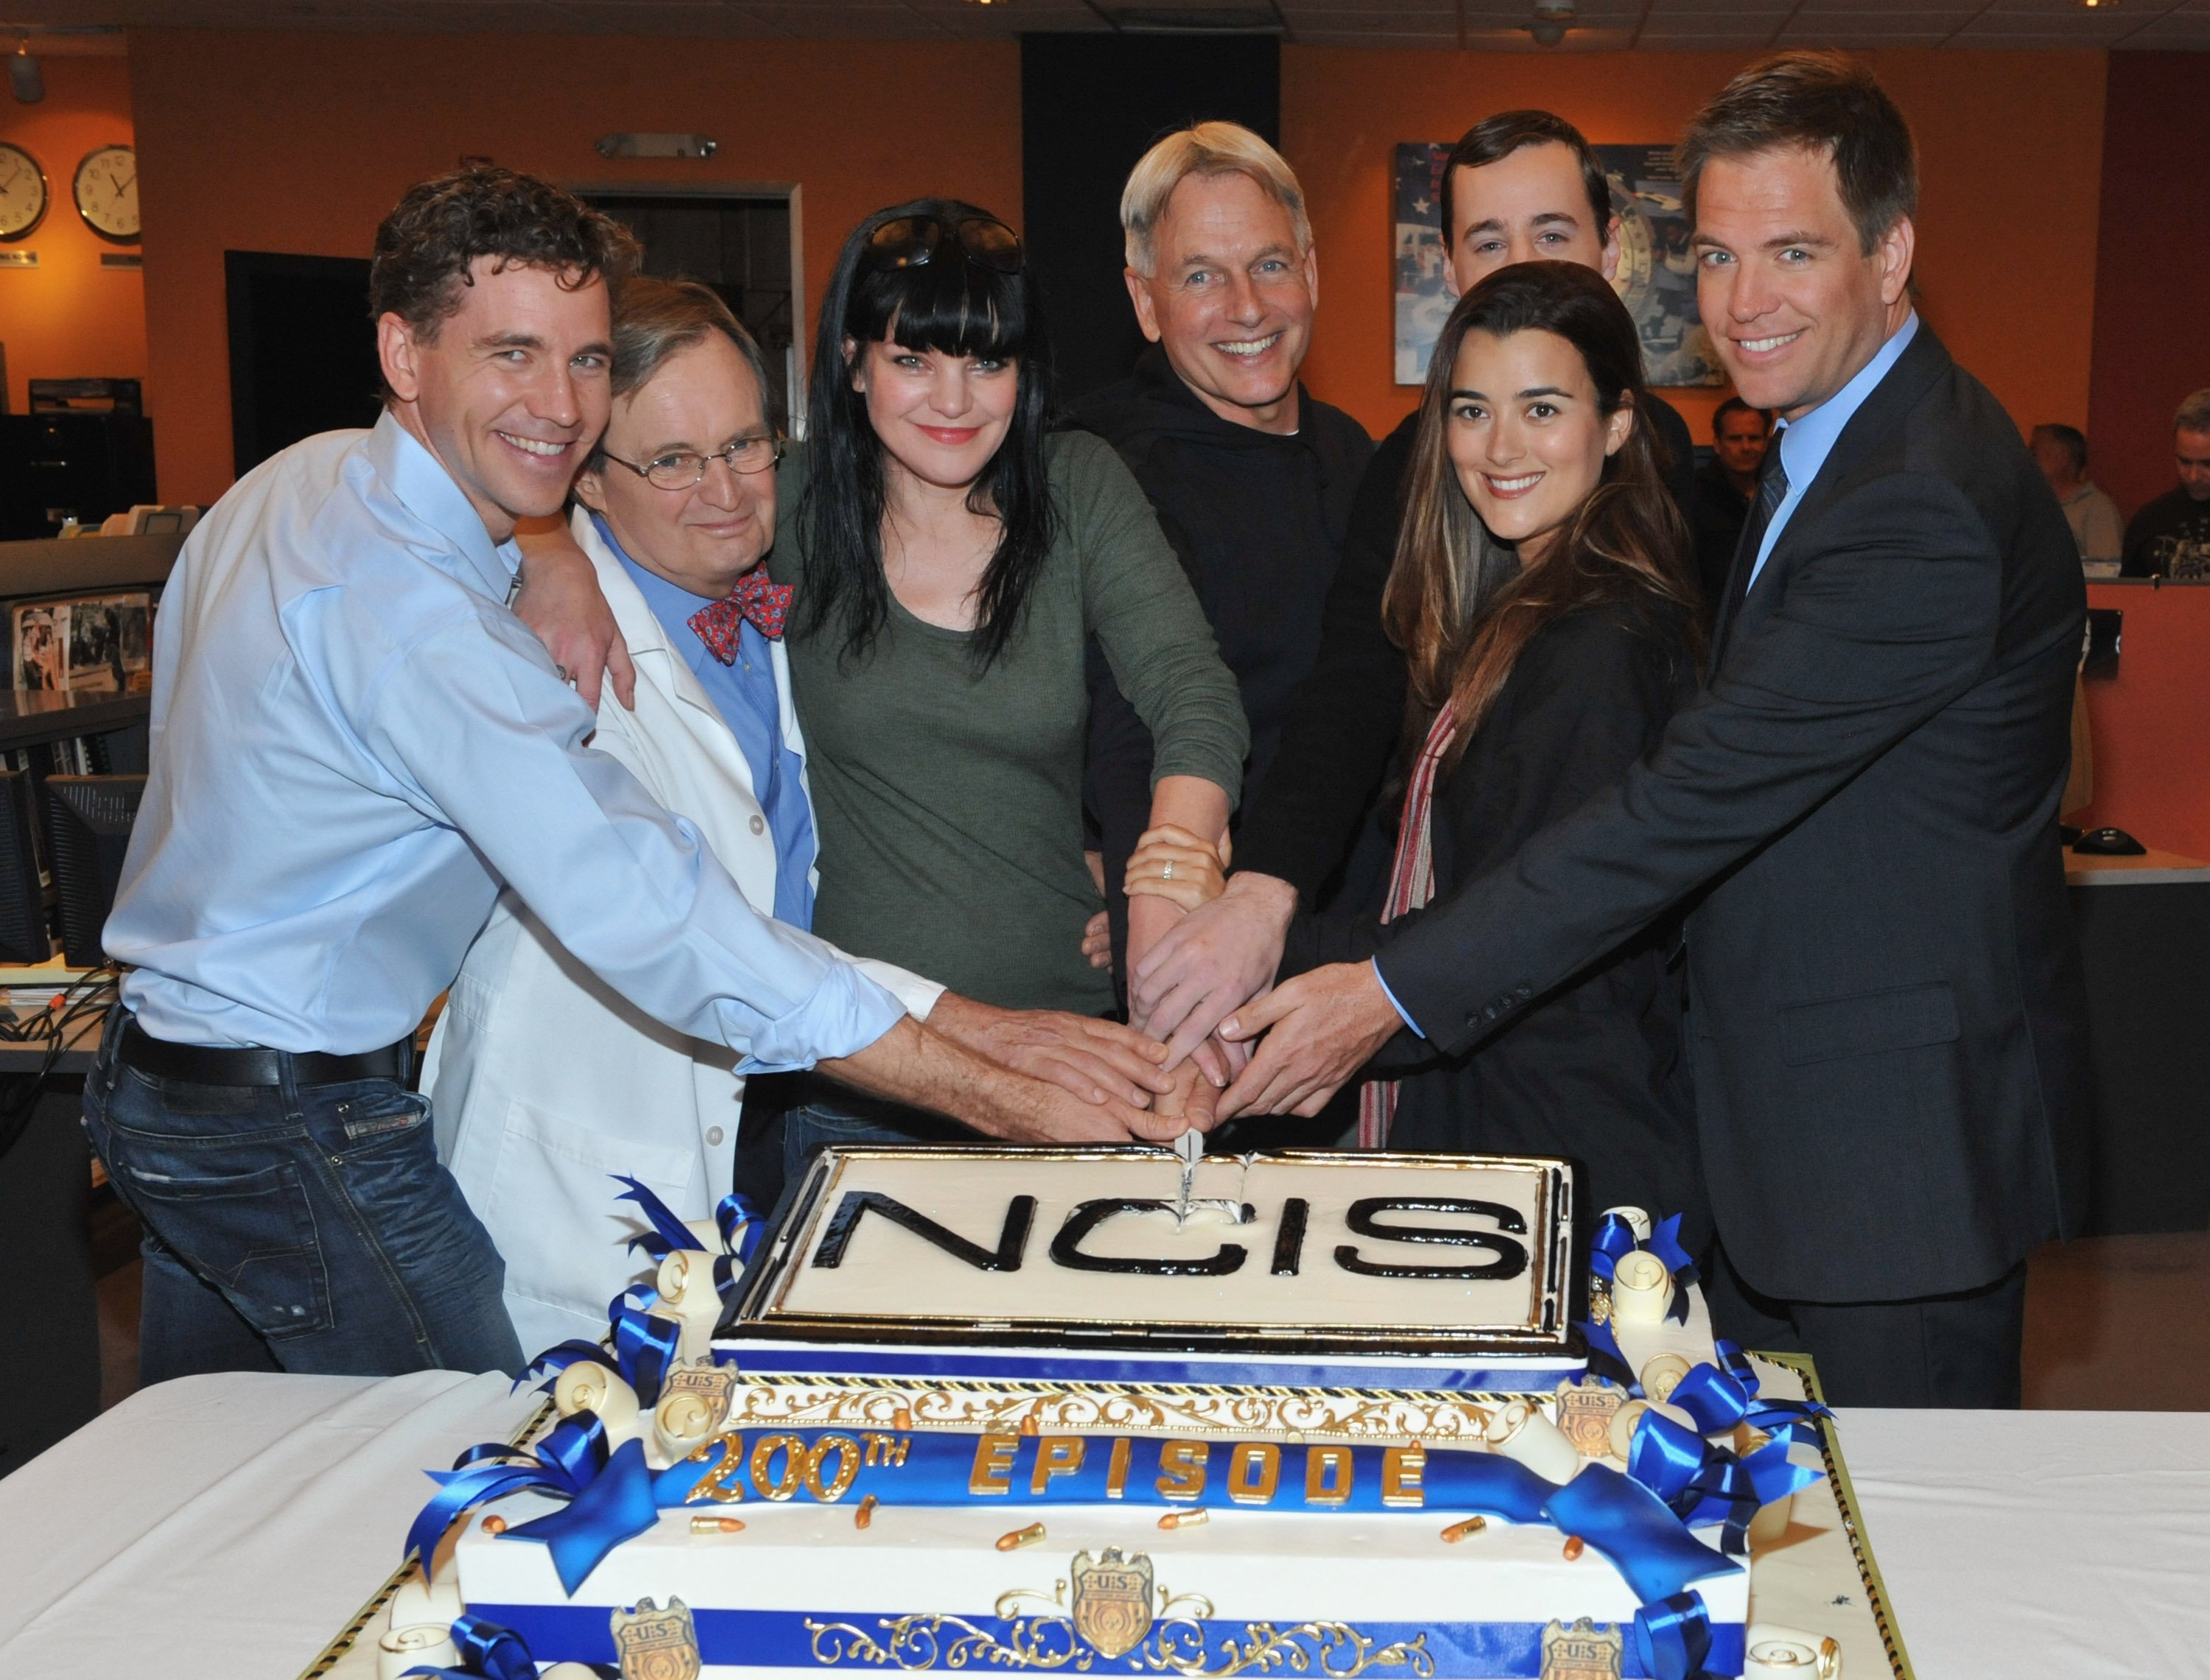 The cast of CBS' "NCIS" celebrate the show's 200th episode | Photo: Getty Images